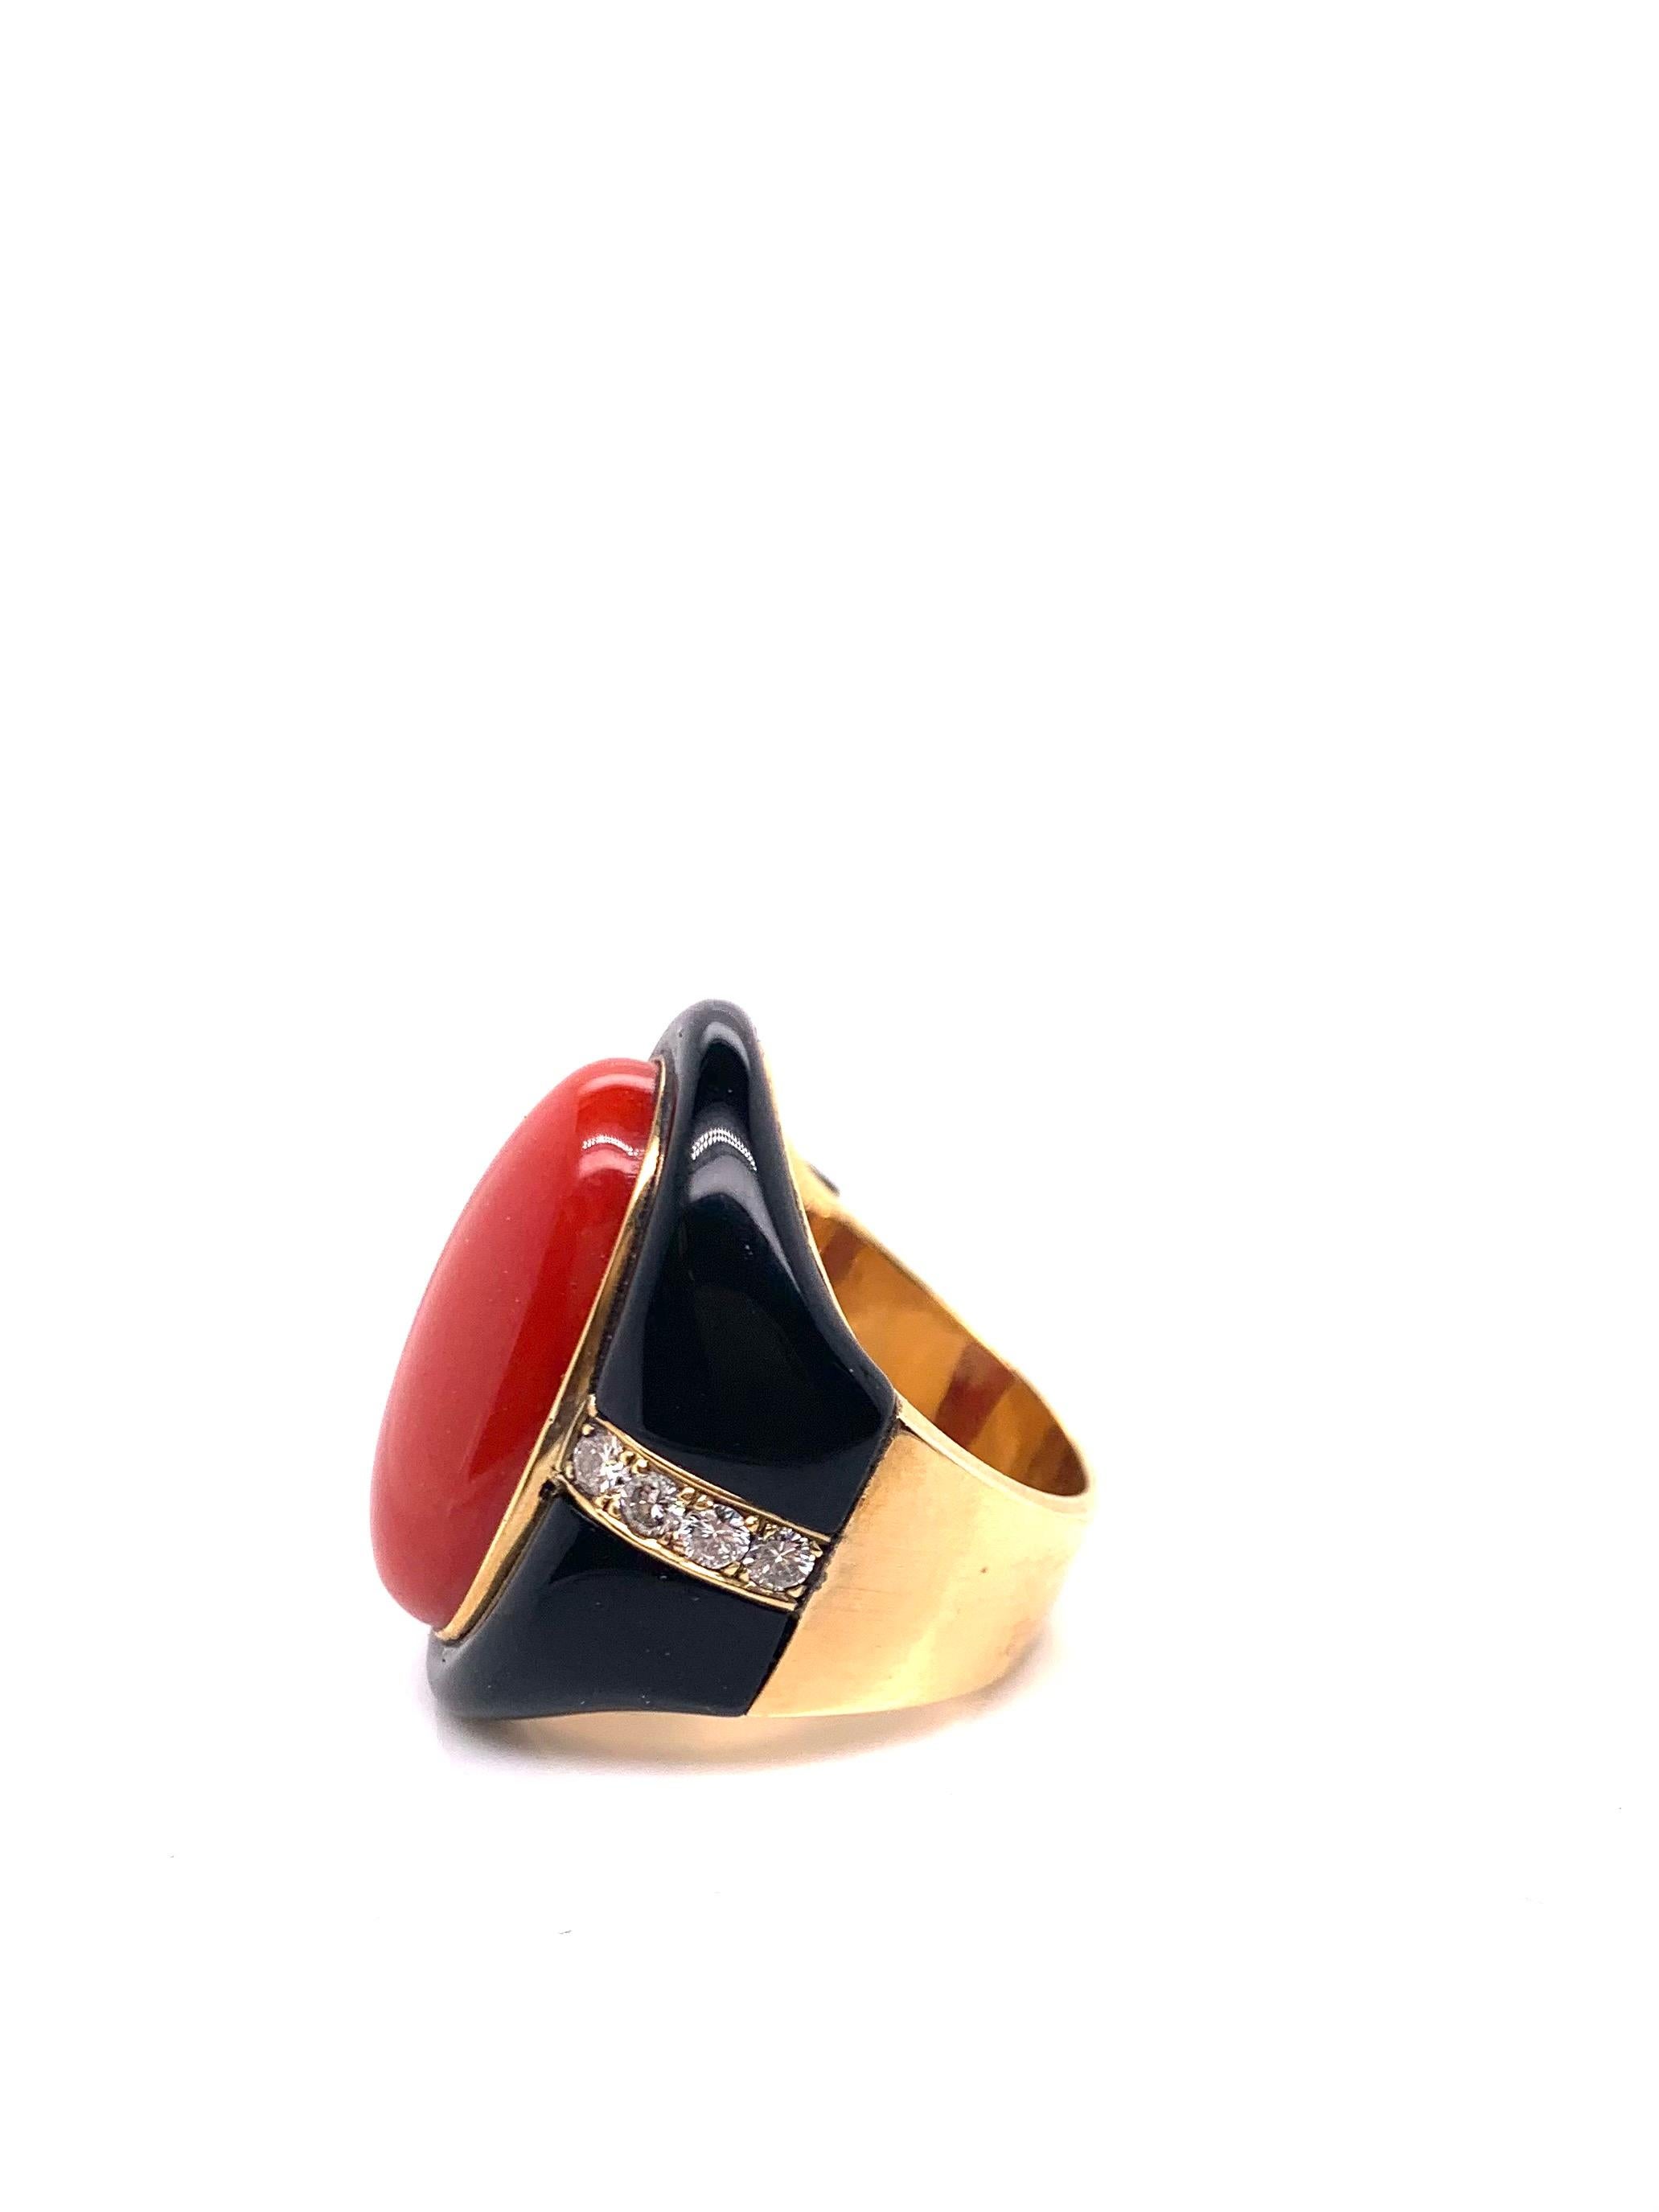 One of a Kind Natural Coral Ring with Black Onyx and Diamonds

Stones: Natural Coral 
Stone Dimensions: 23.3x12.6mm
Stone: Black Onyx Outer Border 
Stones: Diamond
Stone Clarity: VS/SI Clarity
Stones: 8 Round Diamonds 
Stone Carat Weight: 0.48 Carat